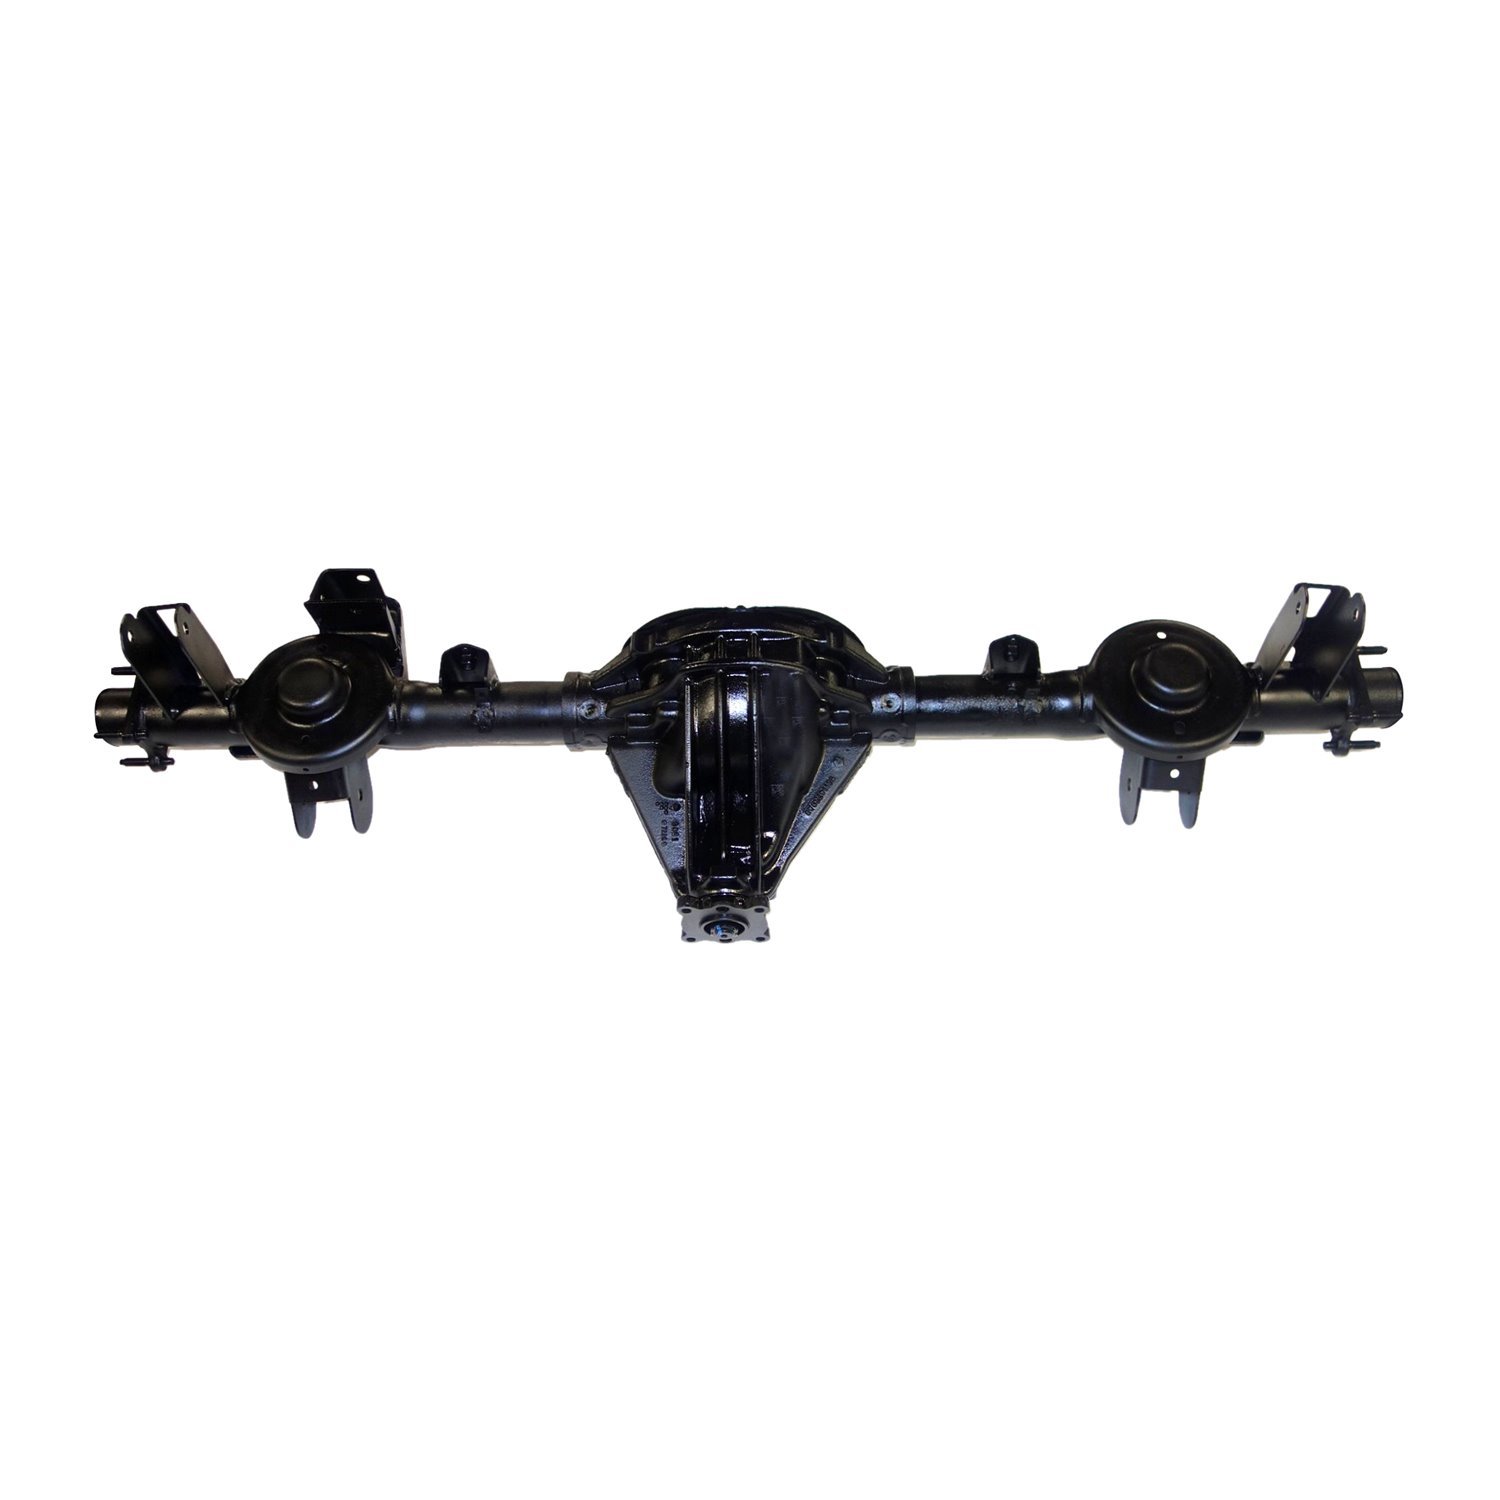 Remanufactured Axle Assy for Chy 8.25" 2003 Liberty 4.11 , 2.4l, U/Joint Driveshaft